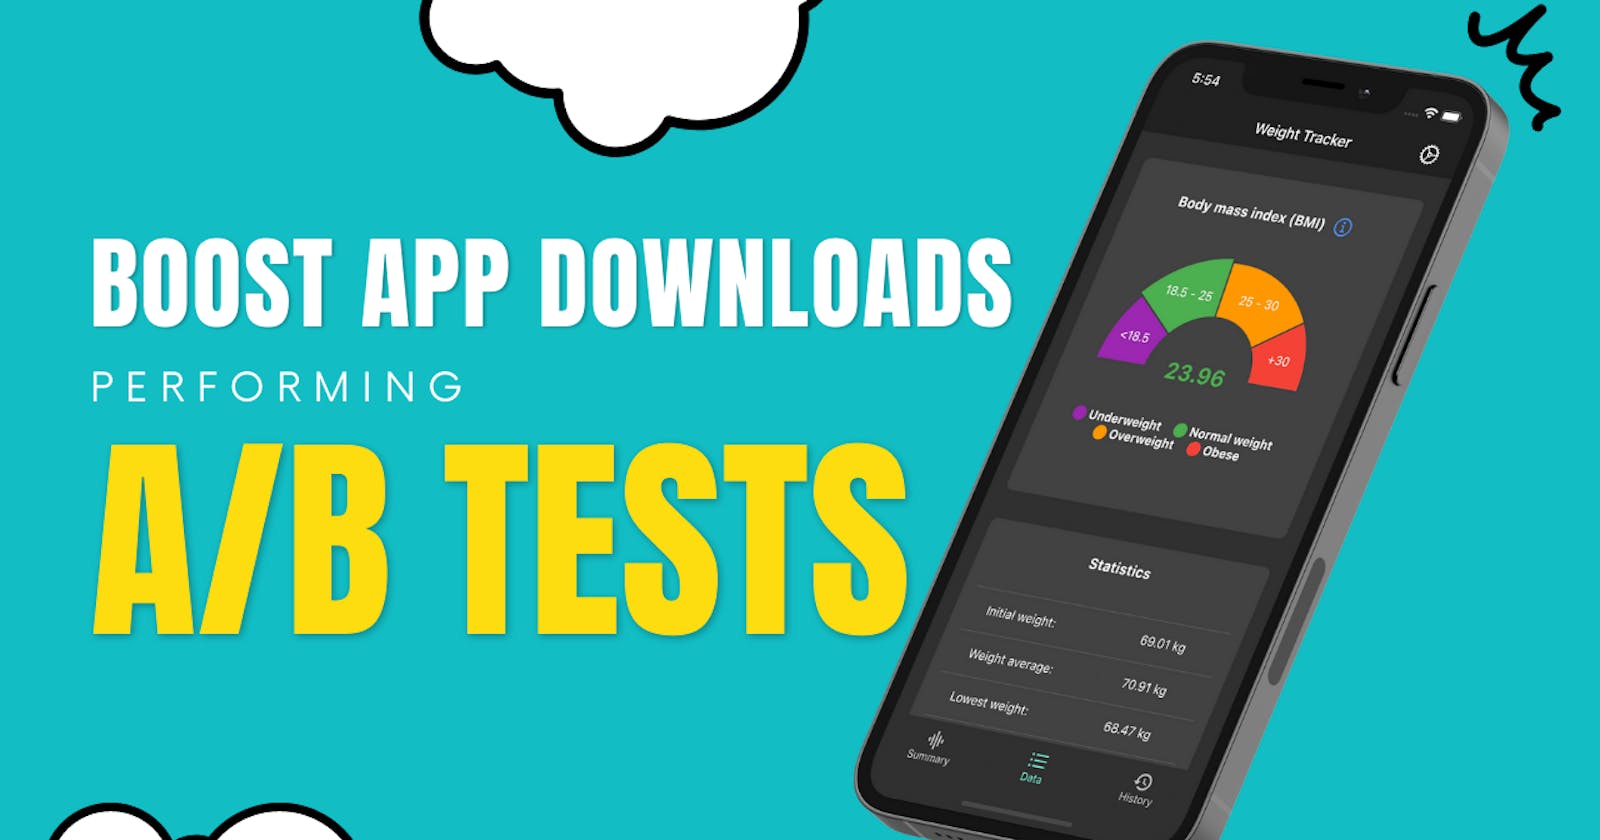 Boost your app downloads with a quick color update